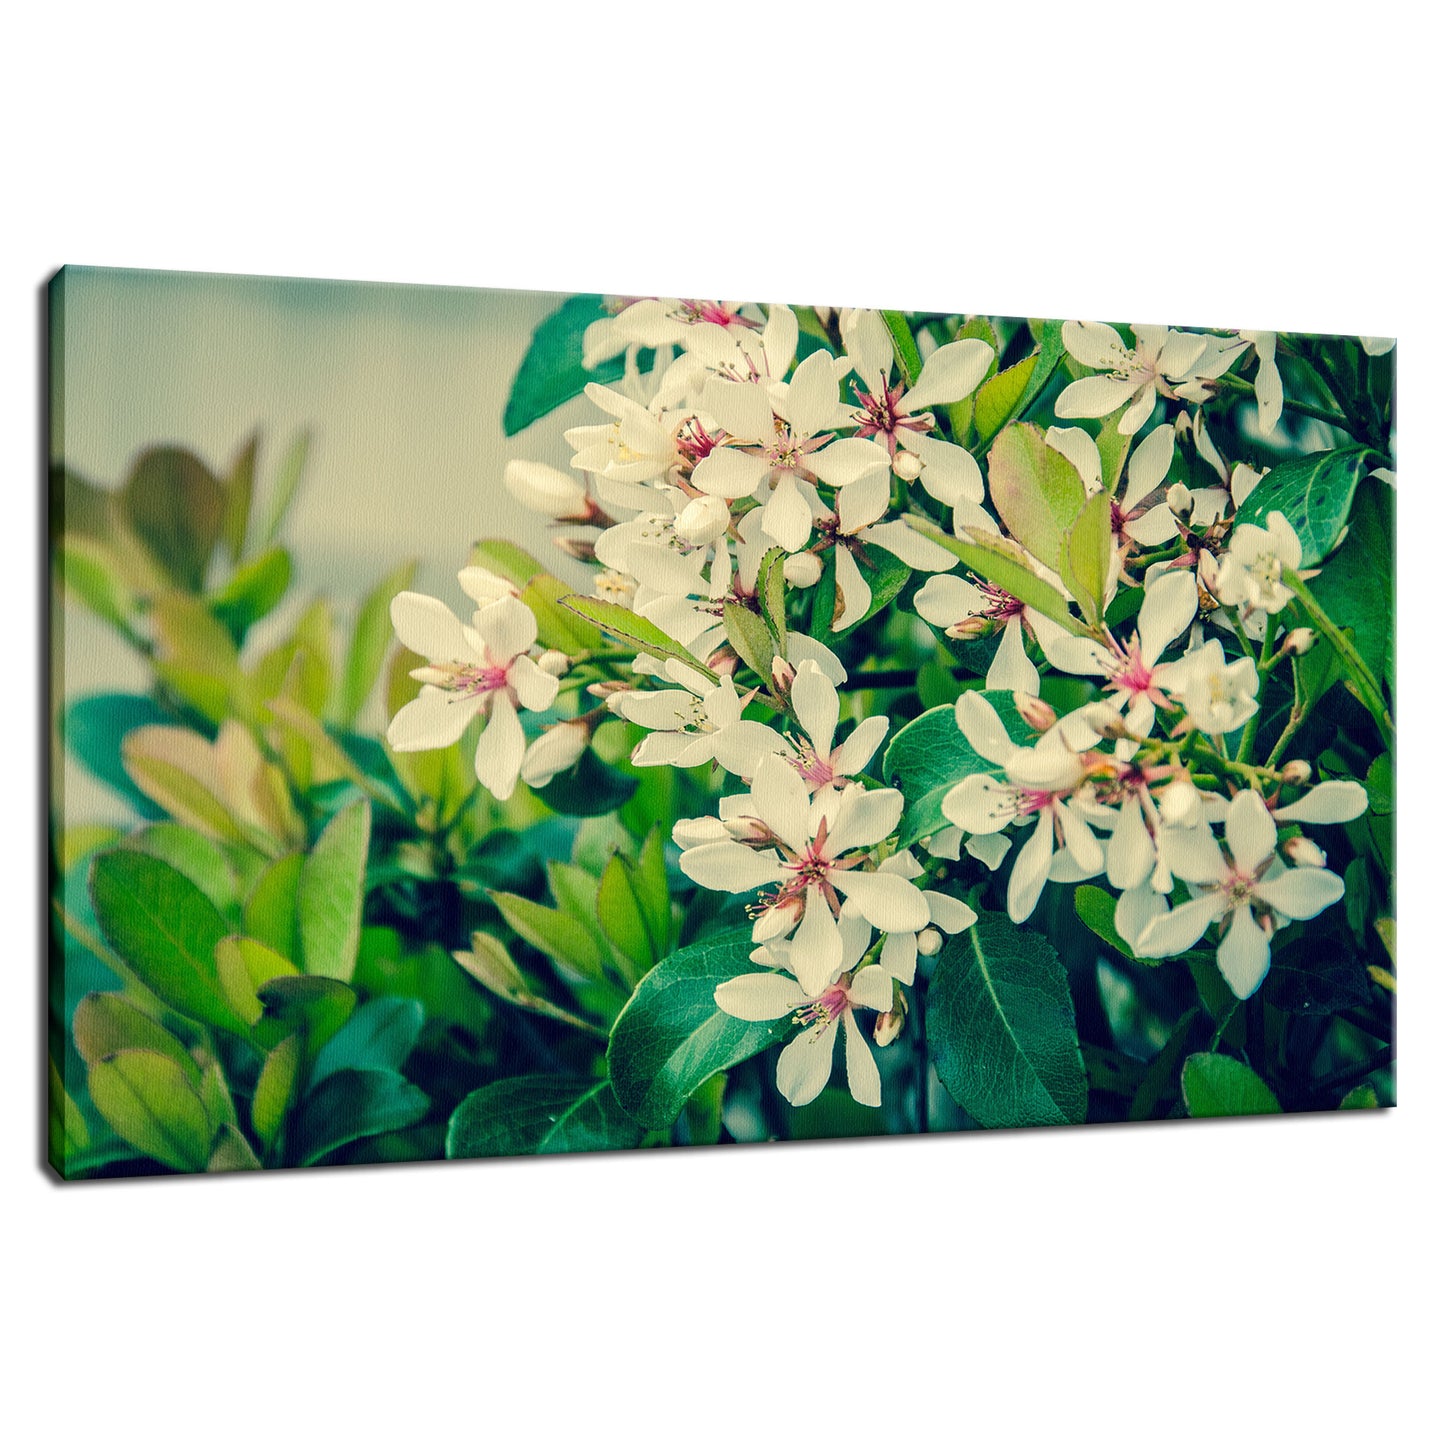 Indian Hawthorn Shrub in Bloom Colorized Floral Photo Fine Art Canvas Wall Art Prints  - PIPAFINEART